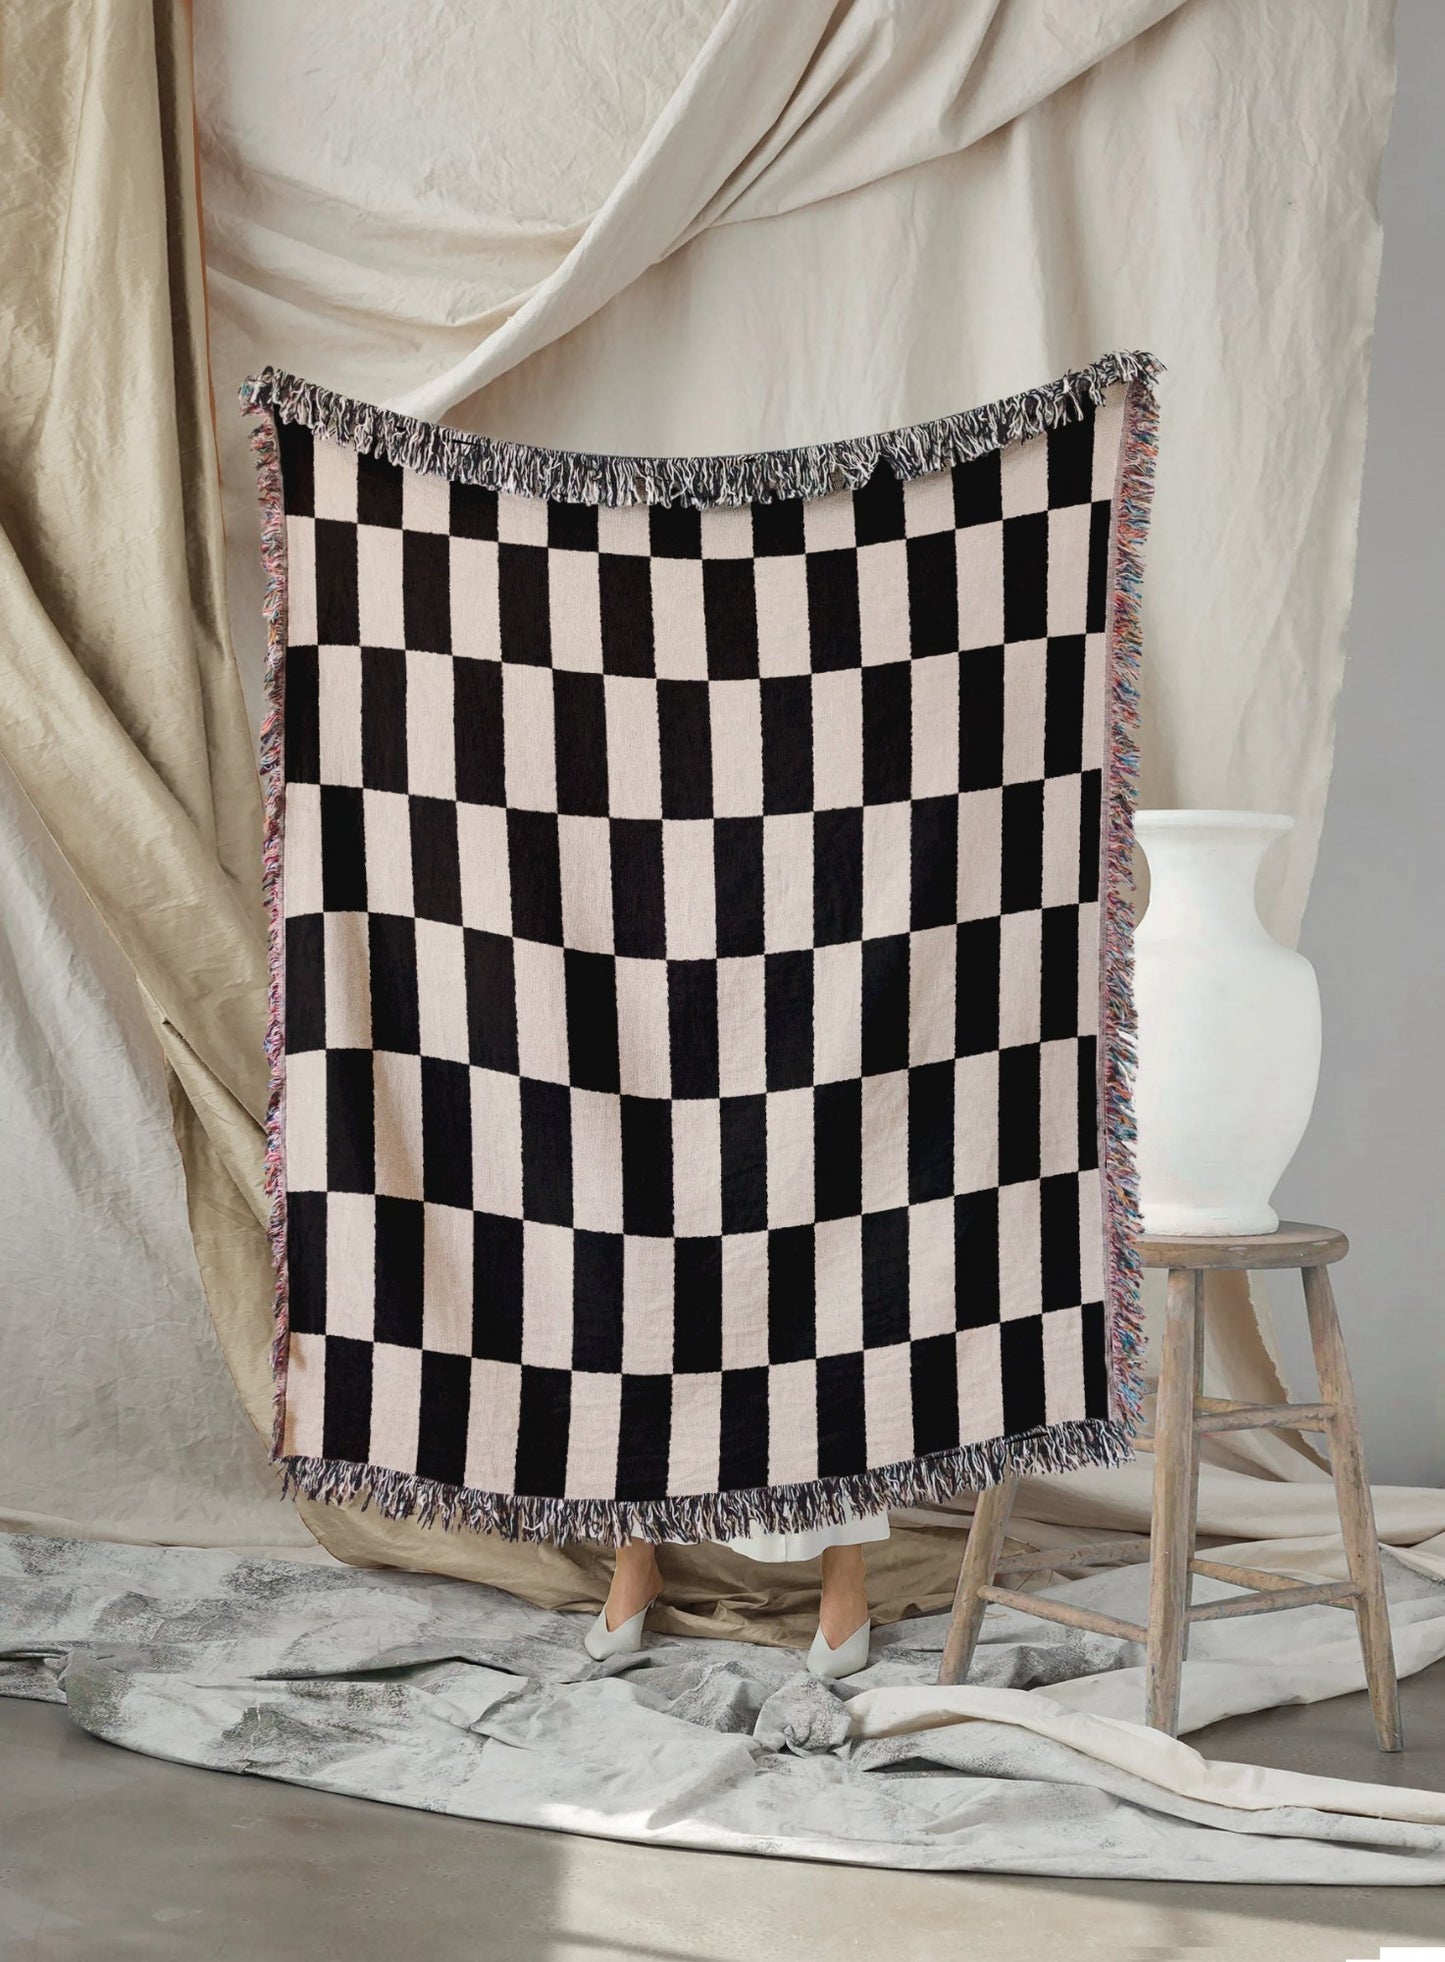 Woven throw, cotton plaid, decor, blanket, living room home decor, checkers, checkerboard, chequers